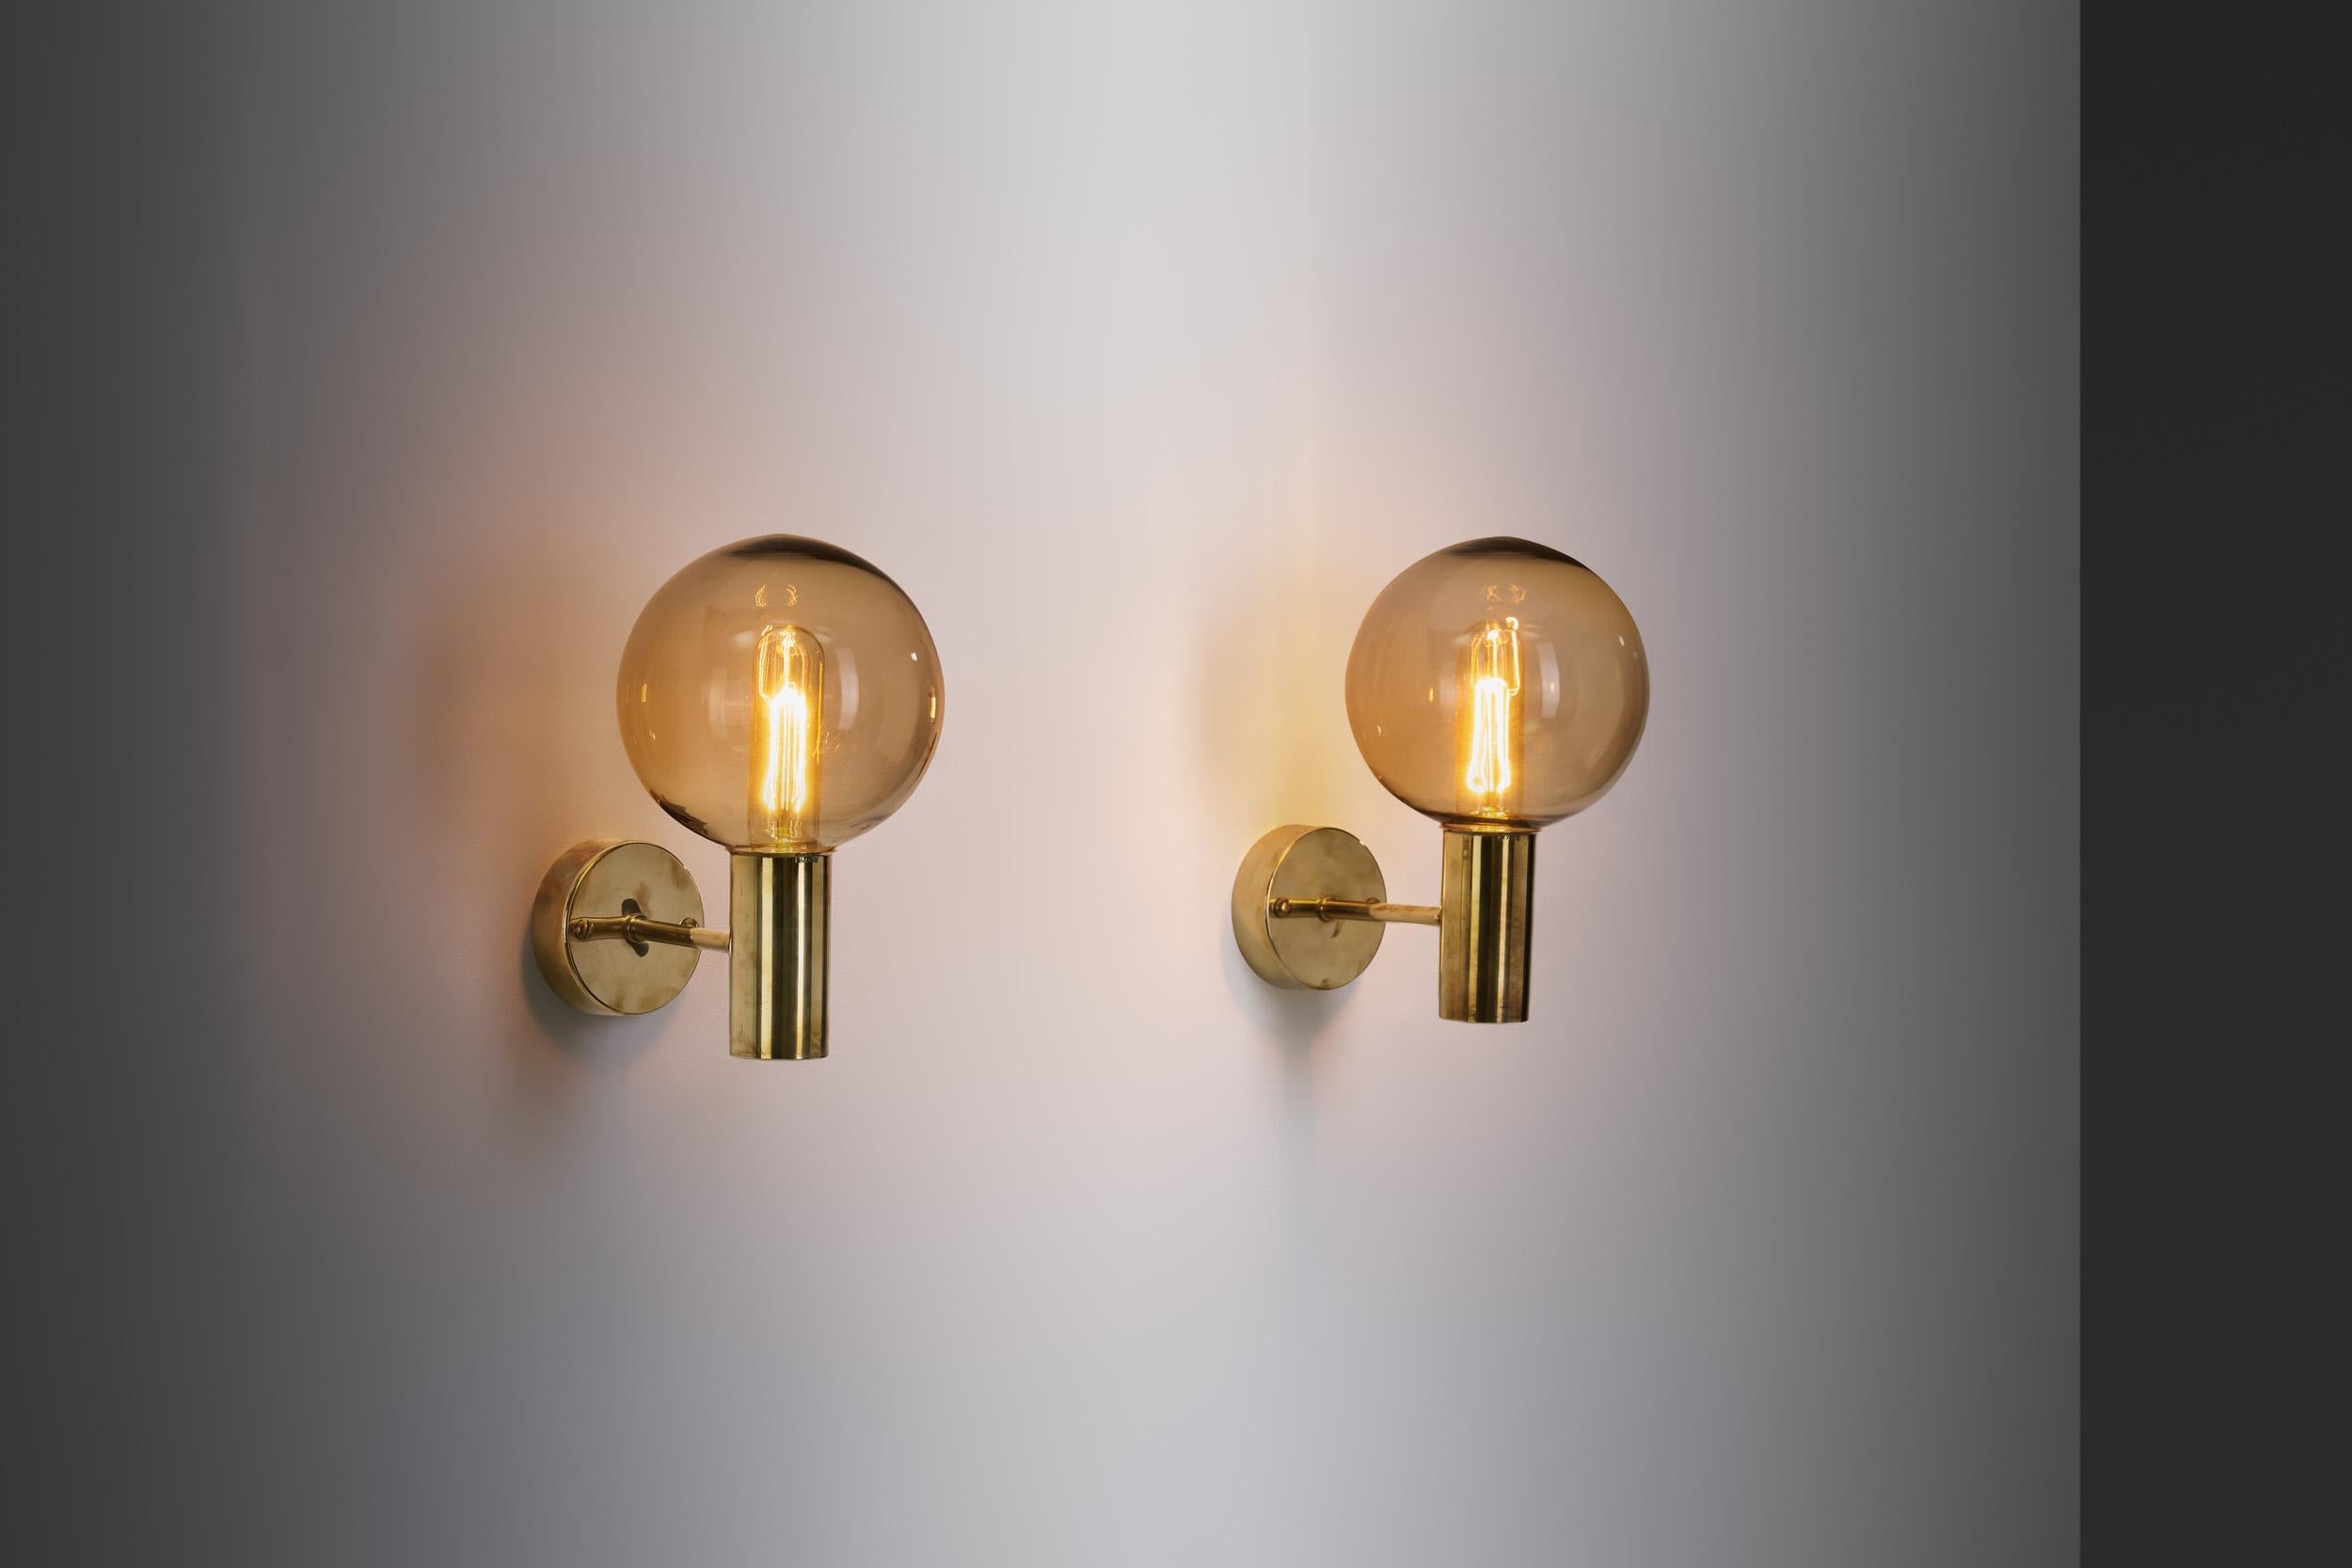 While Hans-Agne Jakobsson designed and produced various types of furniture, his lighting received greater international attention, not without a good reason. As these “V-149/2” wall sconces showcase, the Swedish designer mastered both the direction